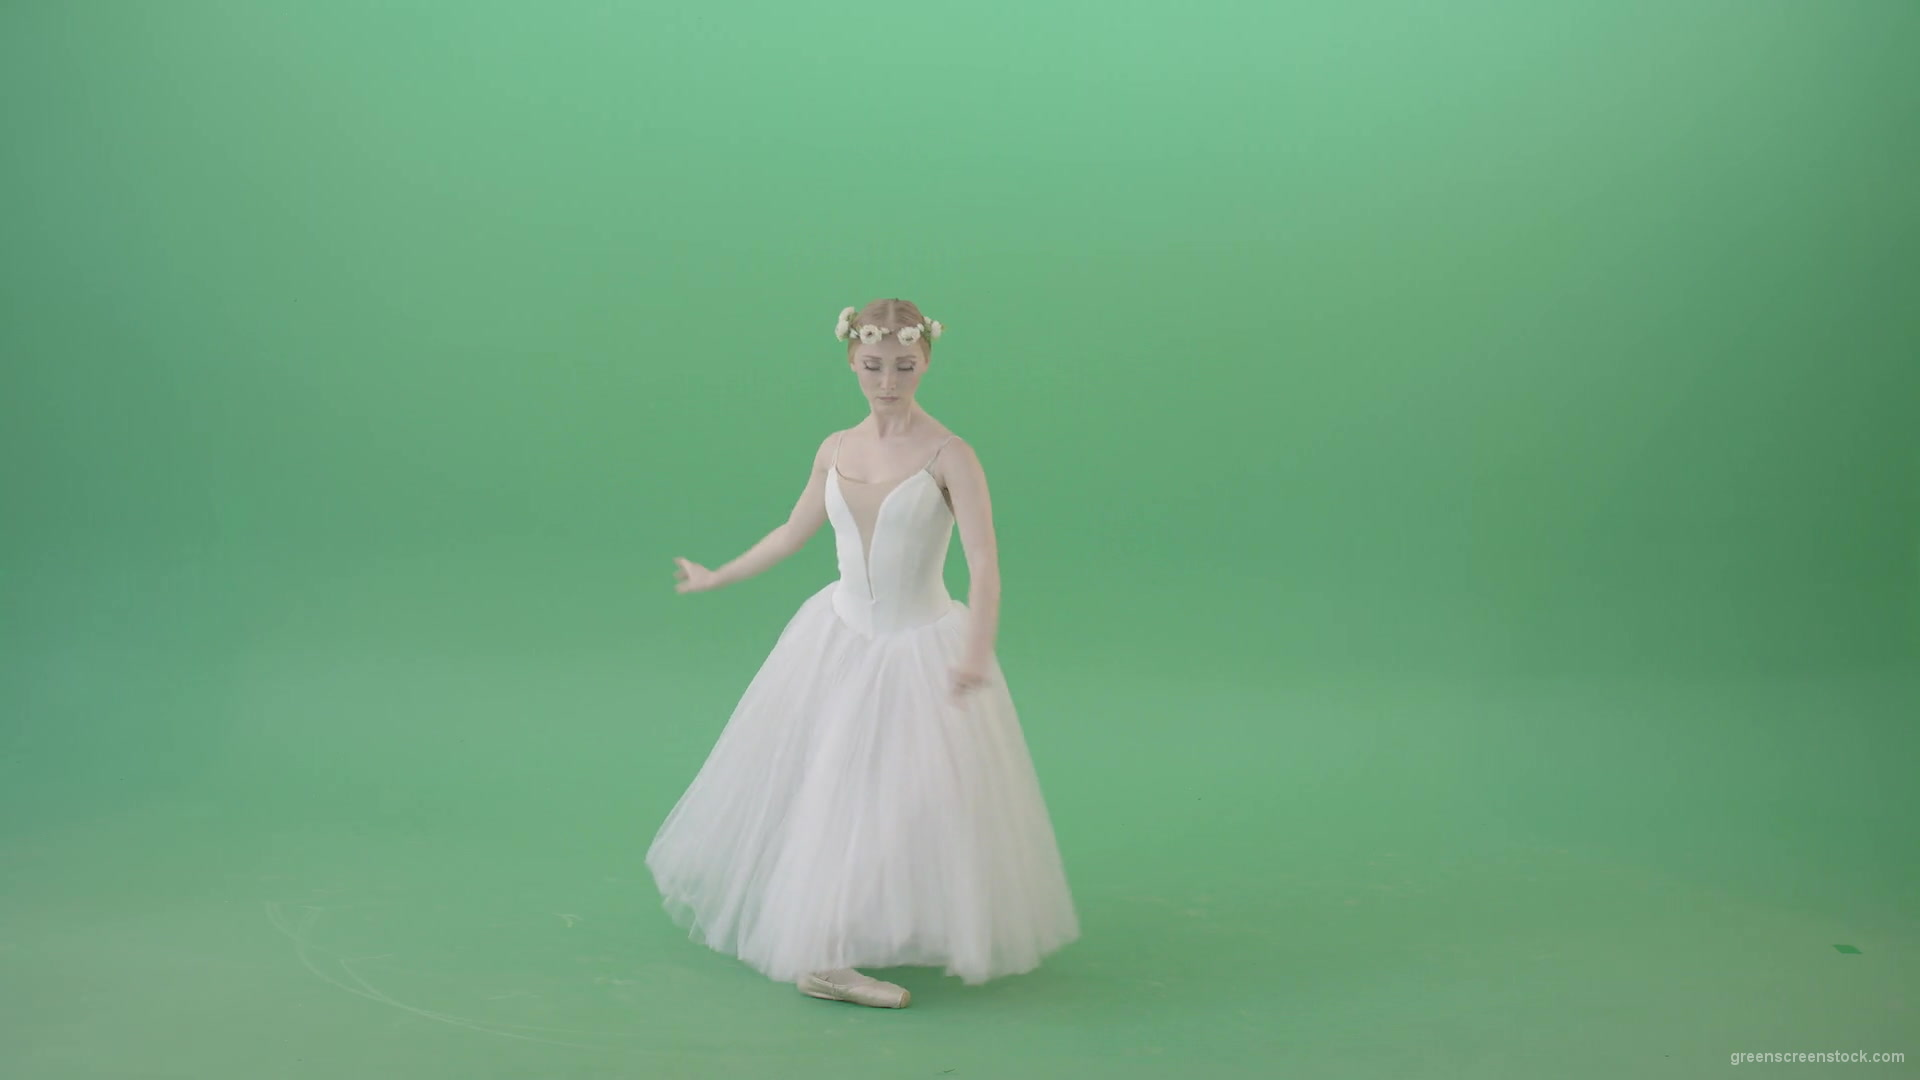 Ballet-Art-Princes-making-royal-regards-in-white-wedding-dress-isolated-on-green-screen-4K-Video-Footage-1920_006 Green Screen Stock